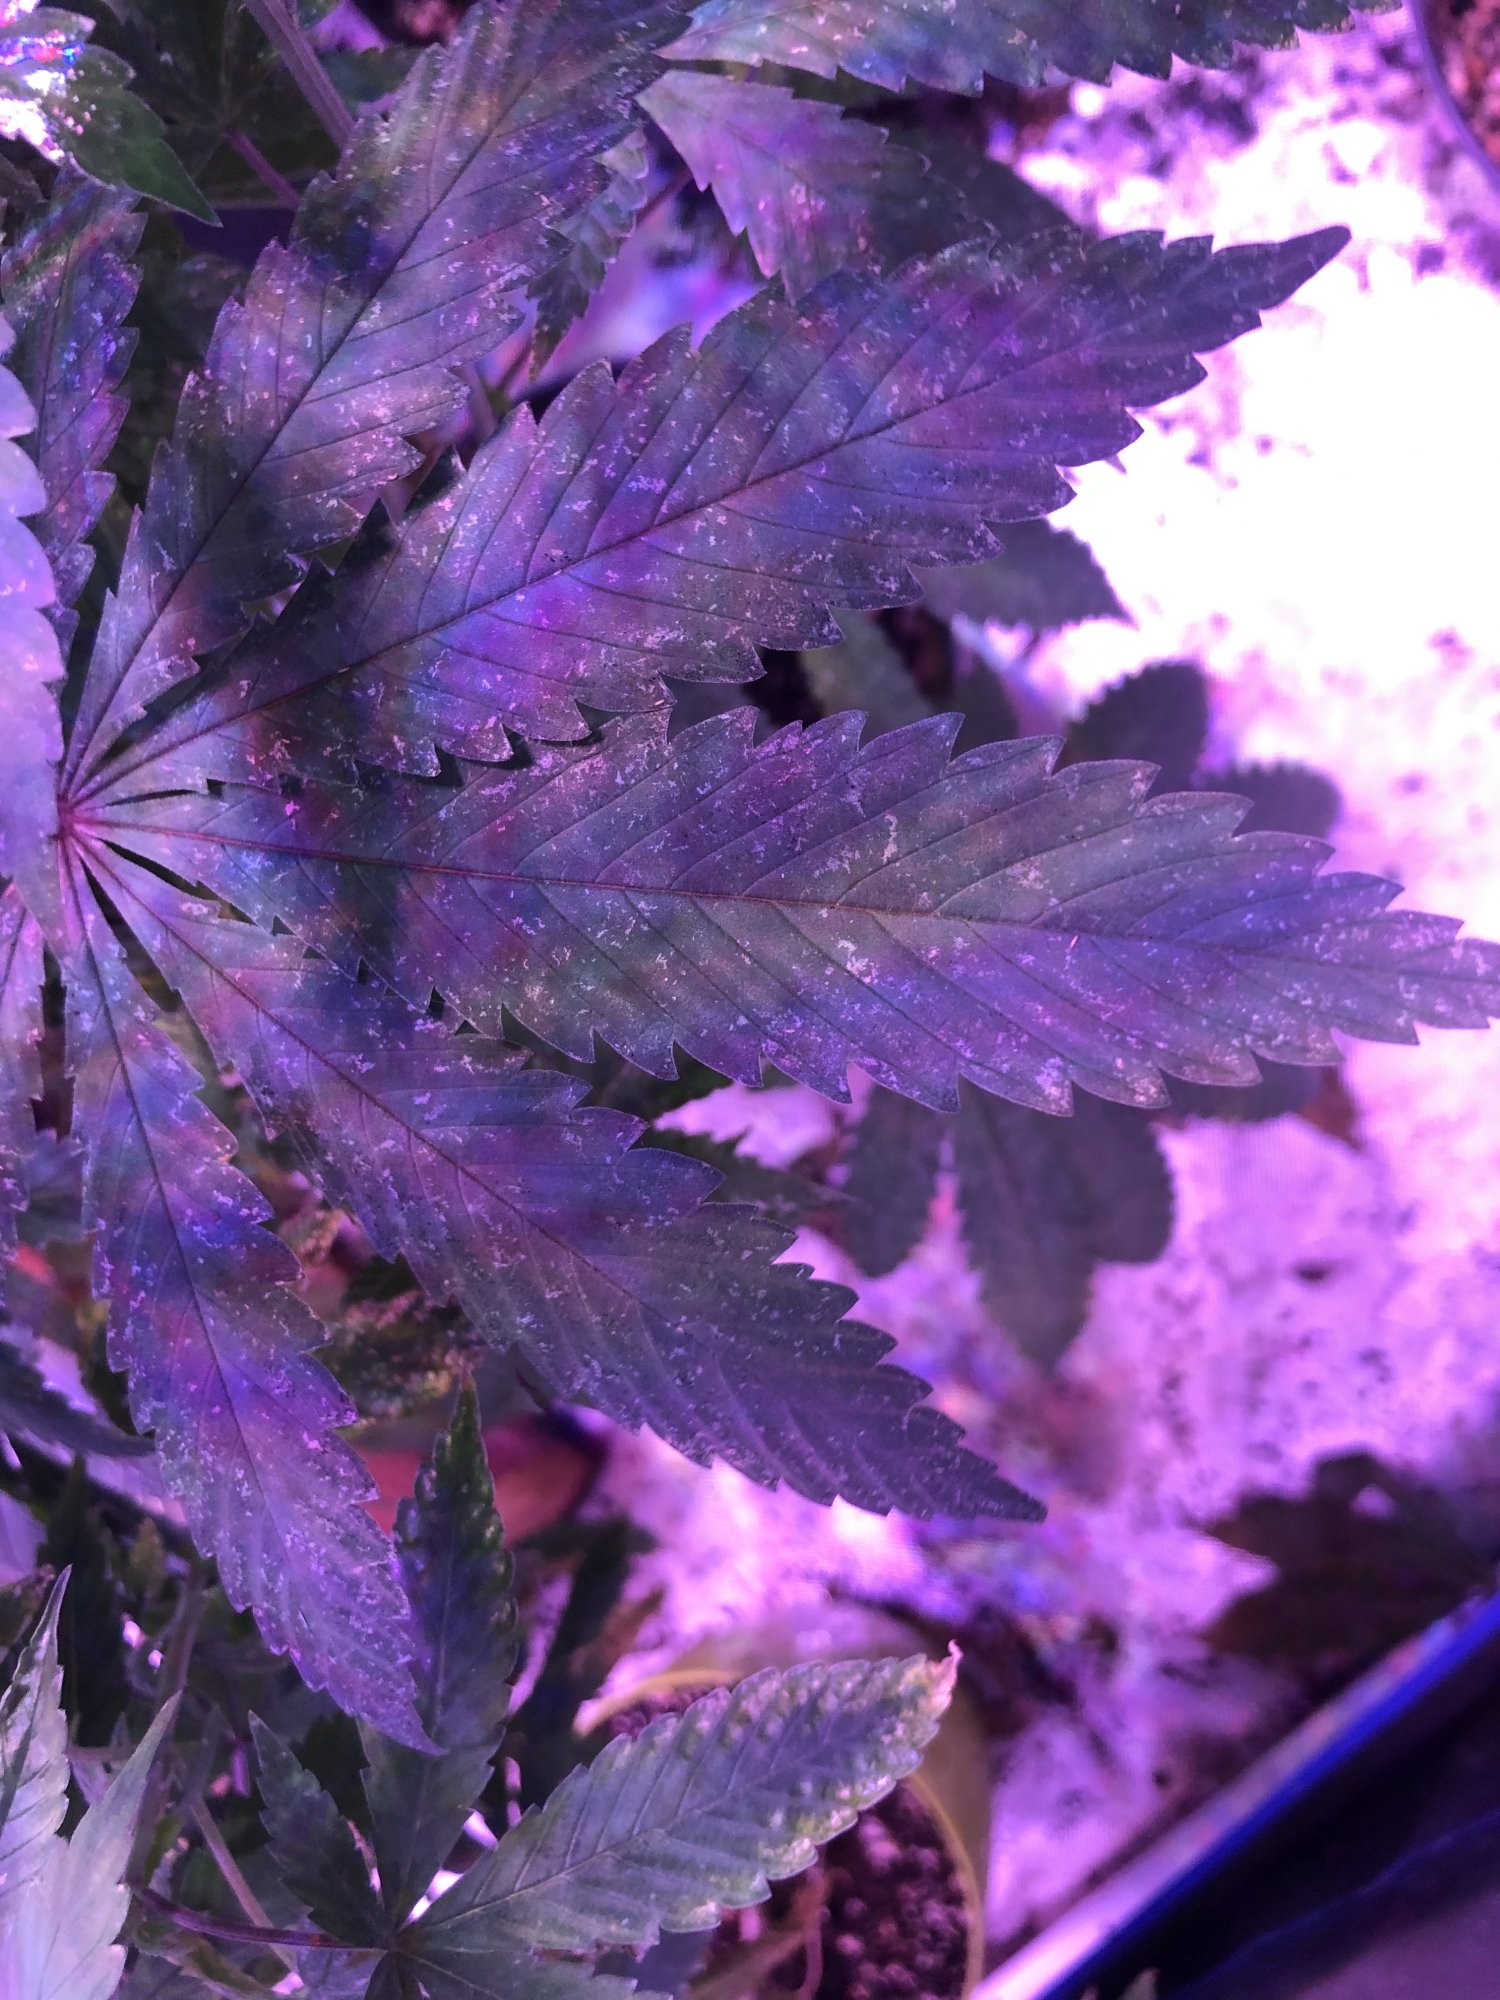 Need to know if its thrips or mold or what 2